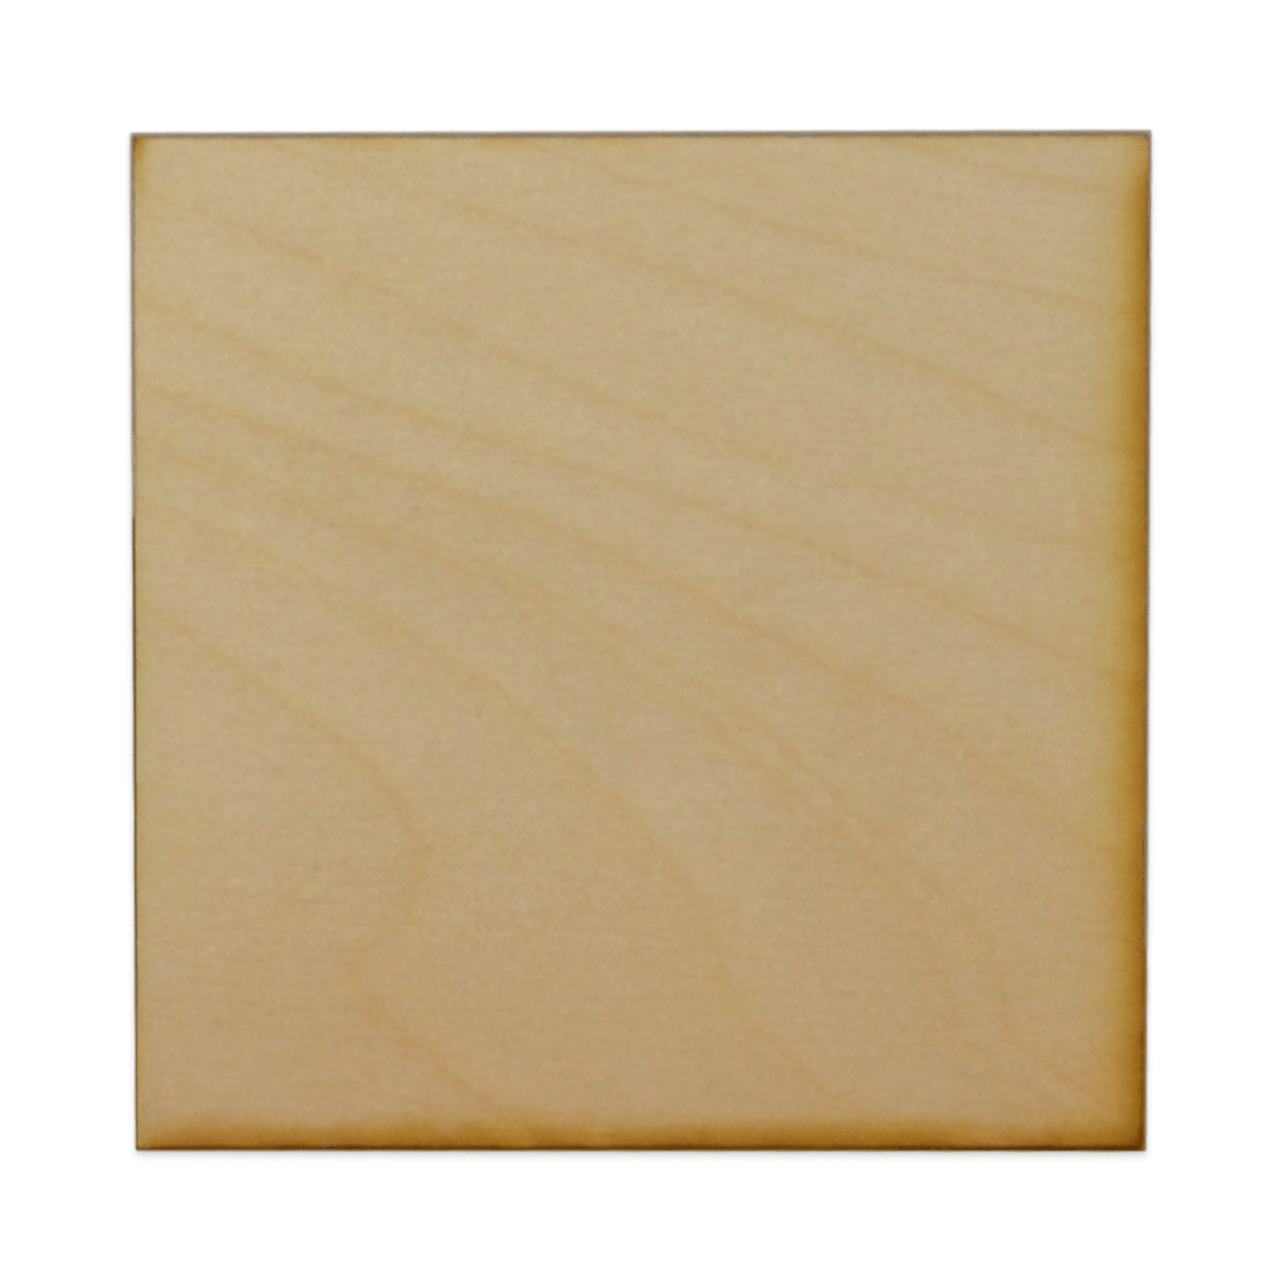 Wooden Square Tiles Crafts, Square Unfinished Craft Wood